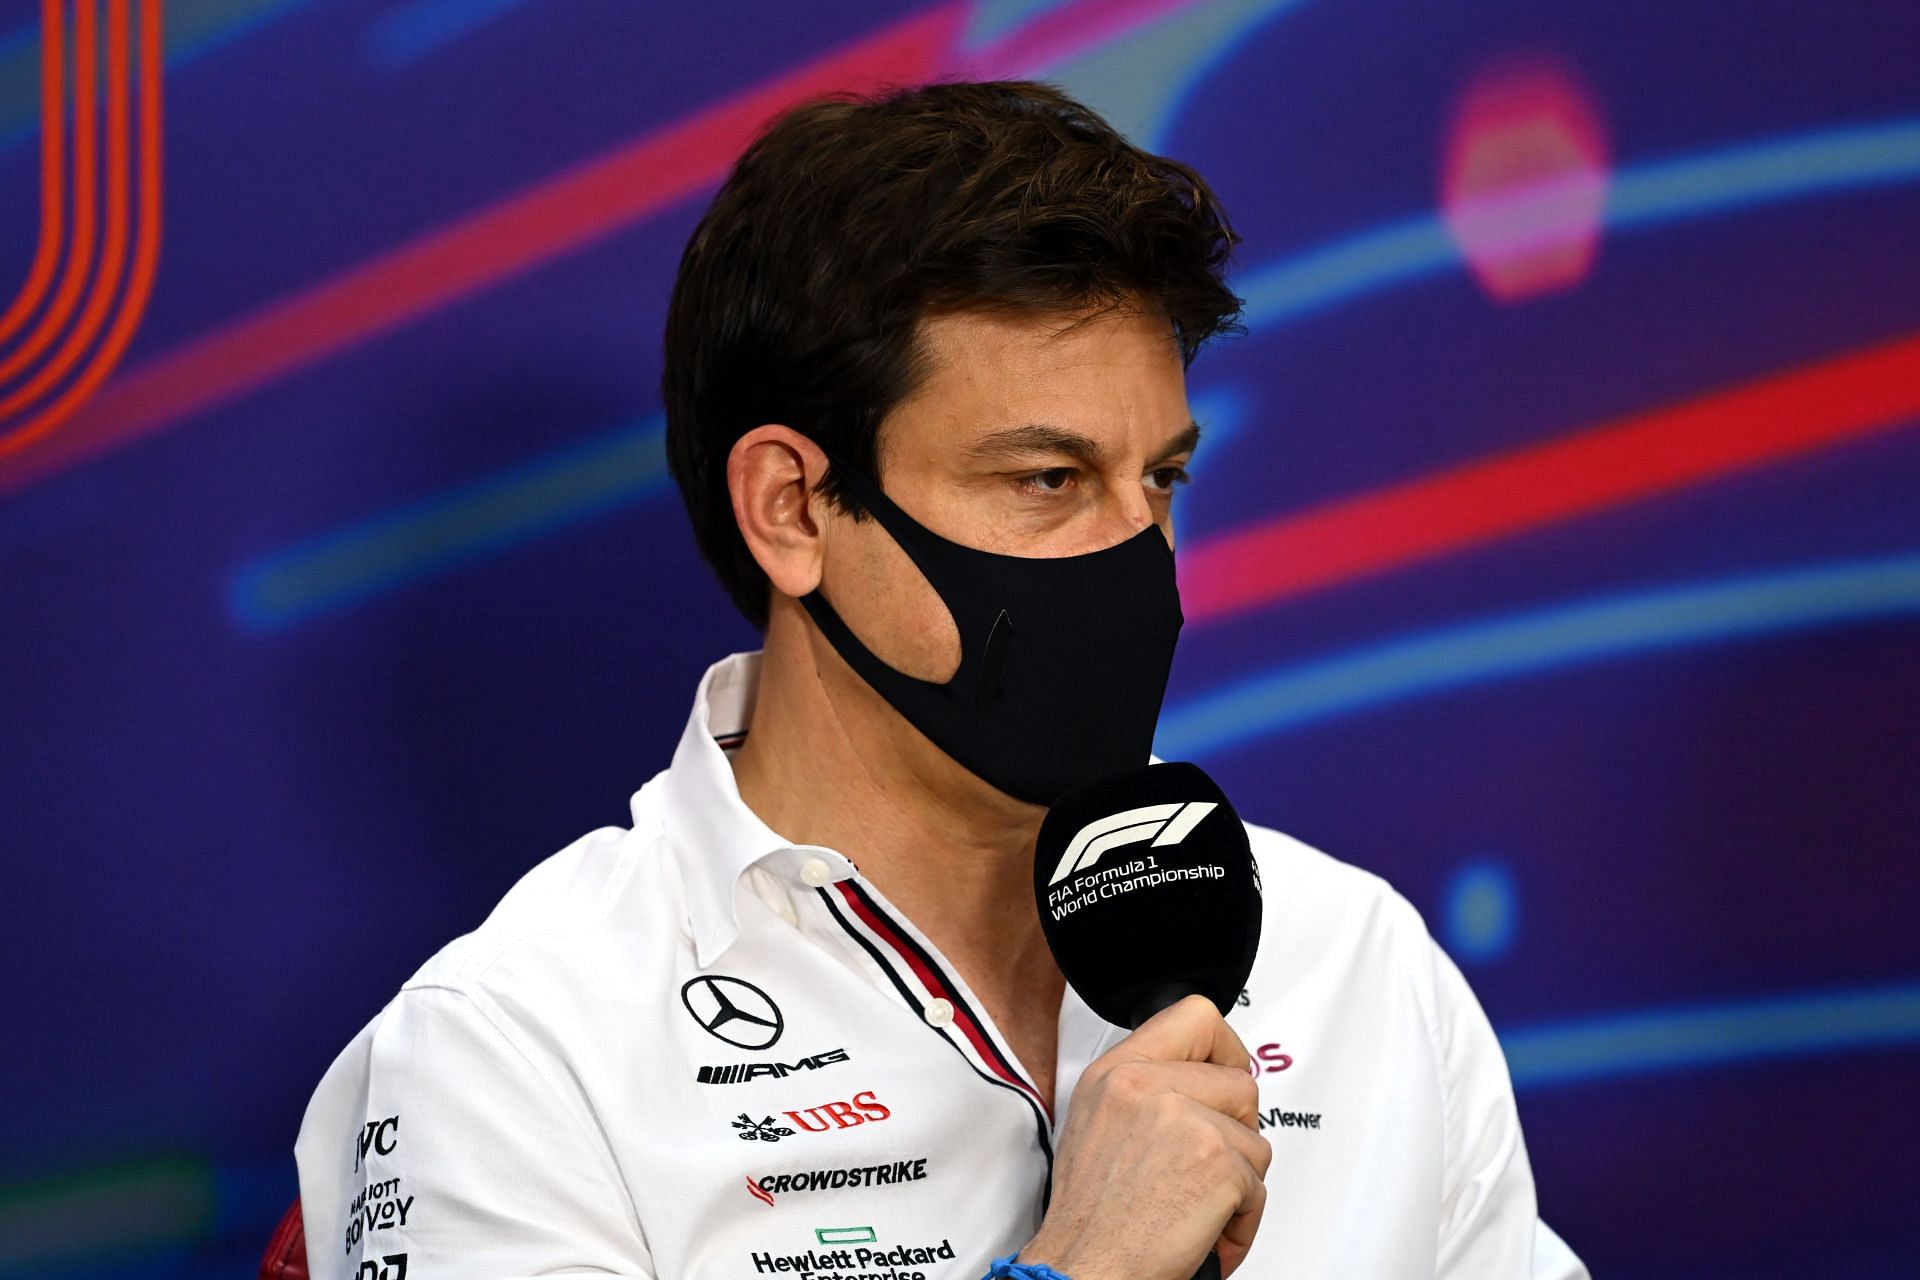 Mercedes team principal Toto Wolff speakign to the media prior to the 2022 F1 Bahrain GP. (Photo by Clive Mason/Getty Images)